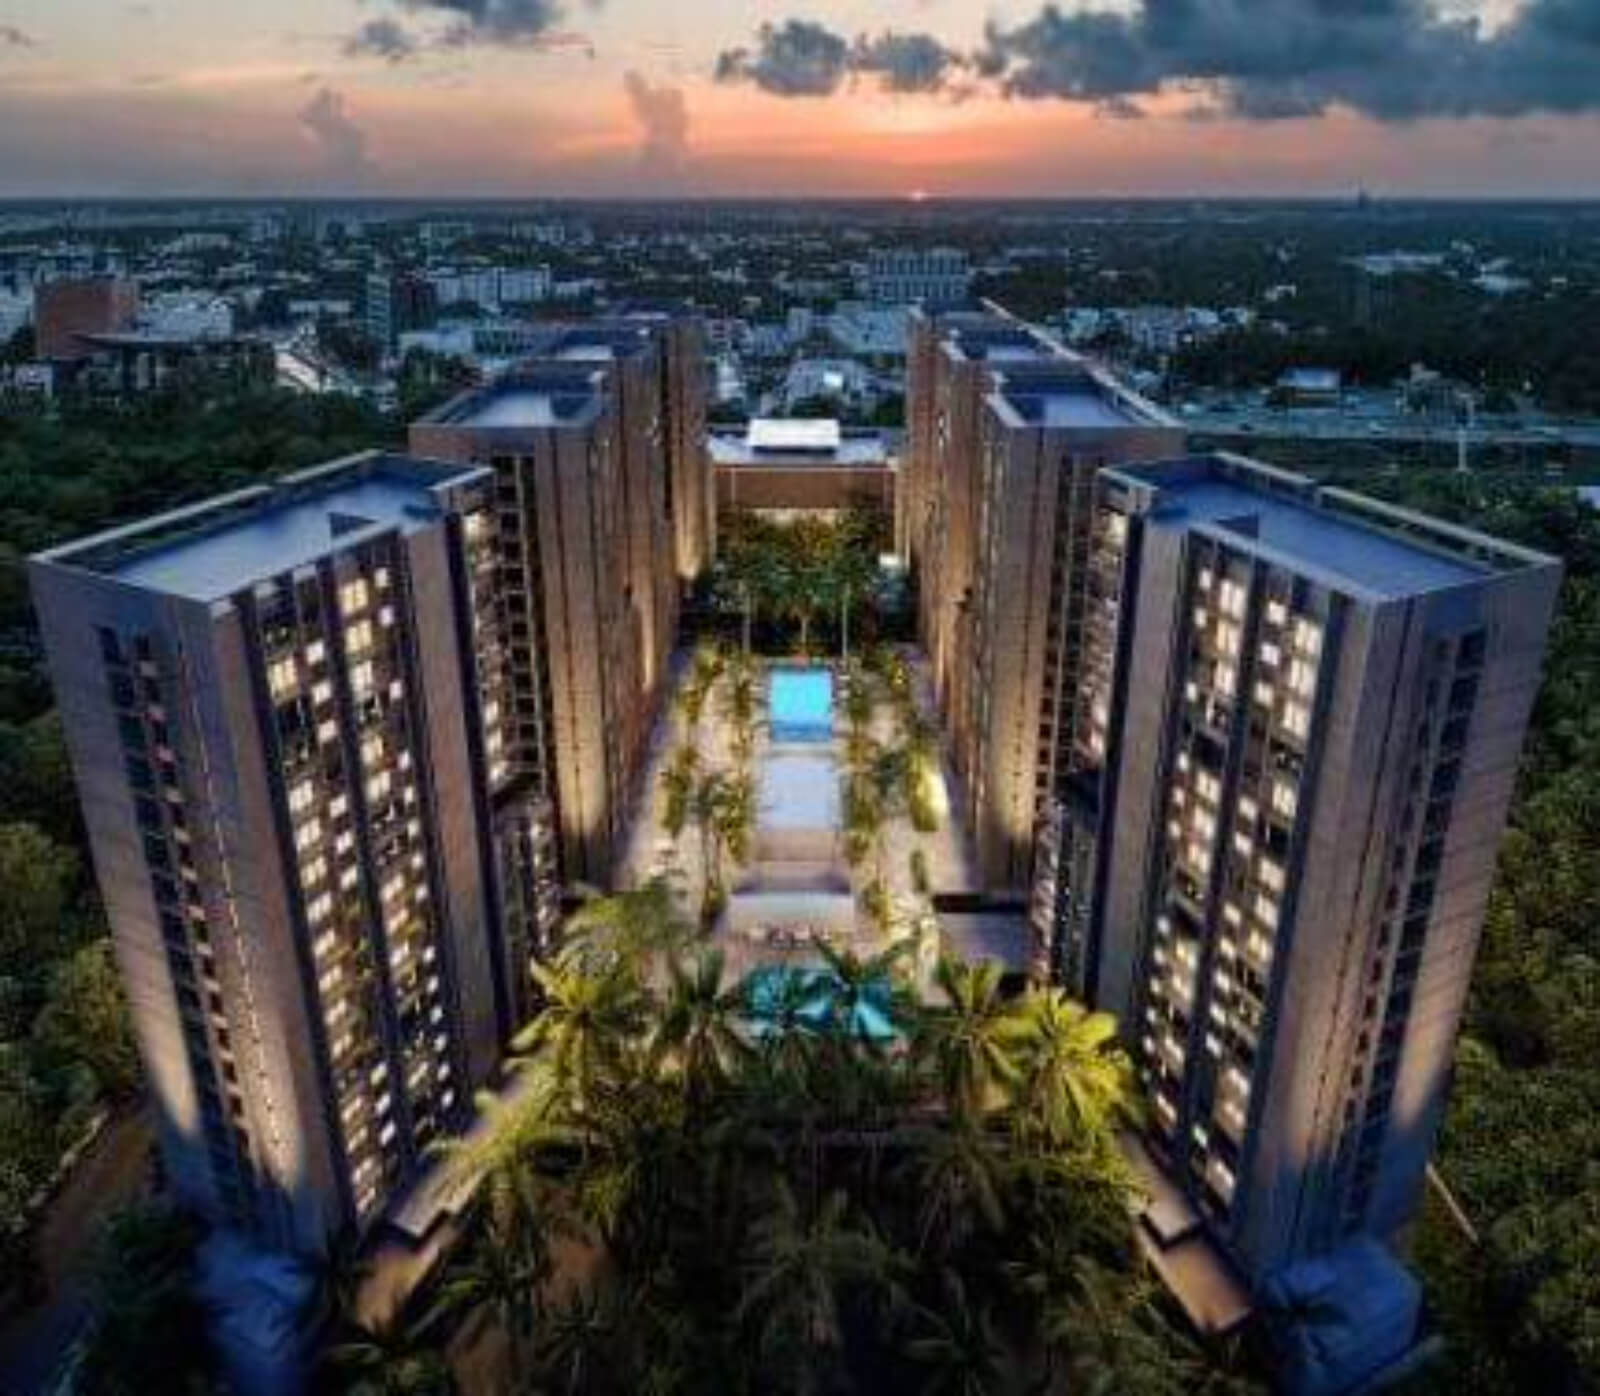 Condominium with panoramic decks, spinning and pool, pre-construction, for sale, Cancún.